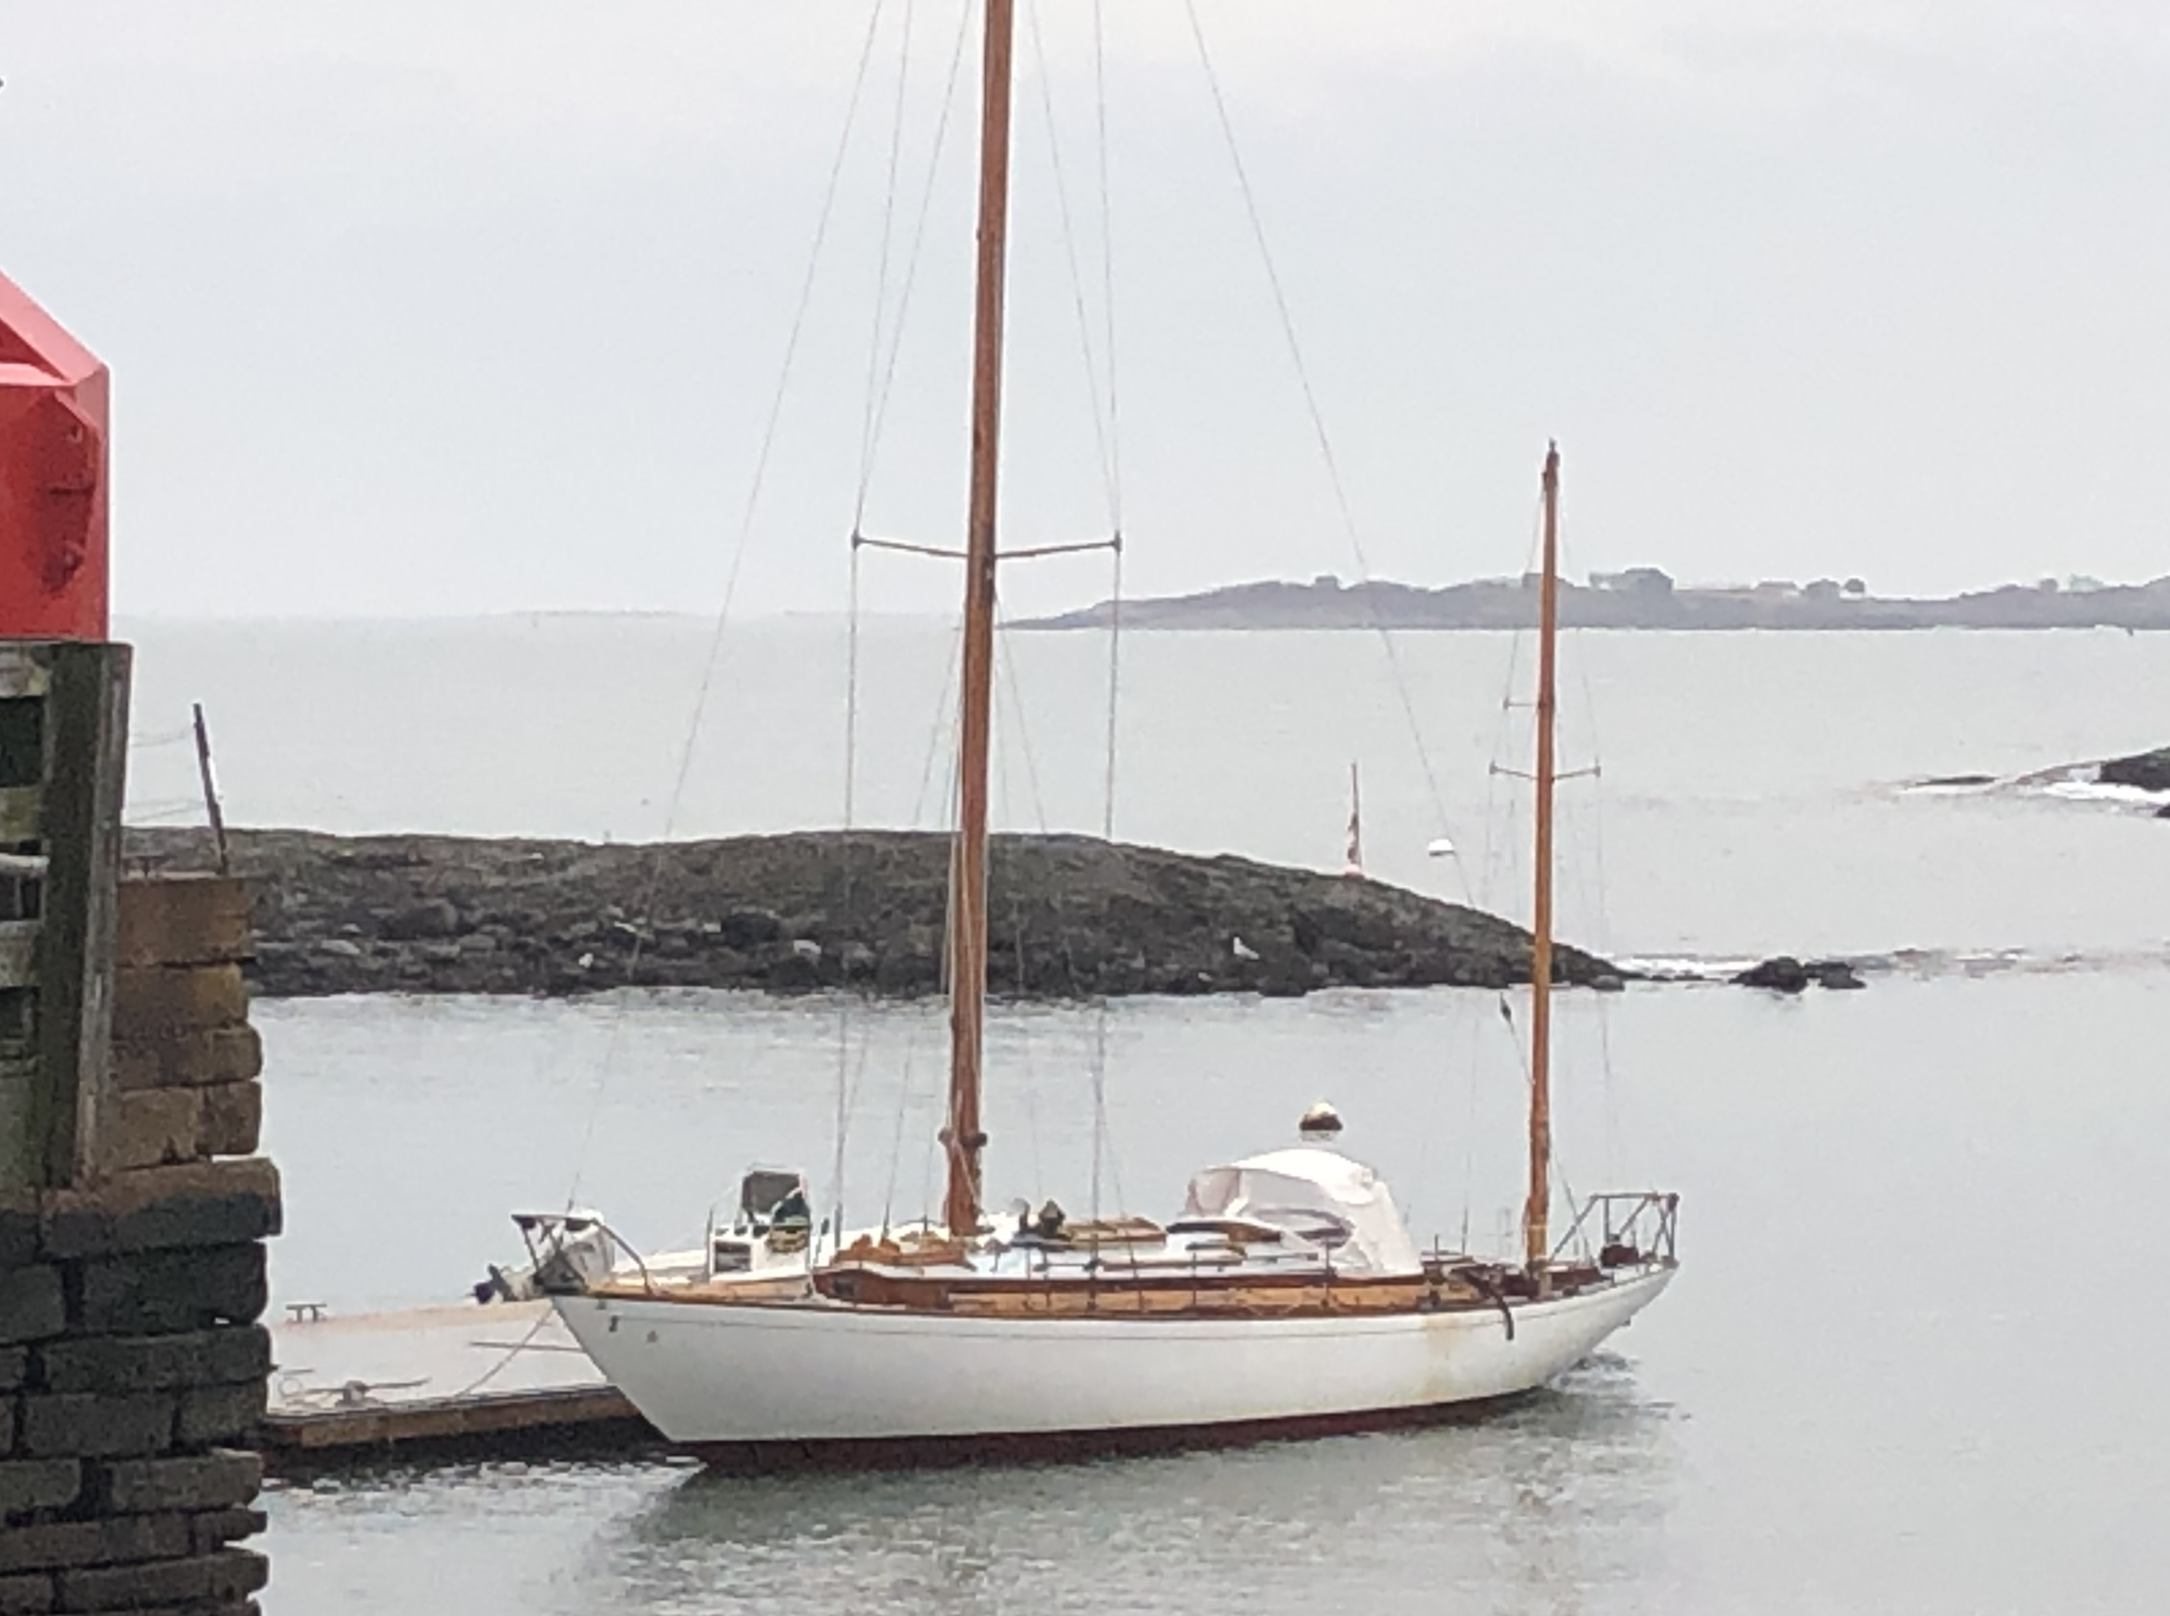 Concordia Yawl #37 (41'0") YANKEE. Built in 1956 by A&R. Located Marblehead, Mass. Looking for a good home. More info & images: